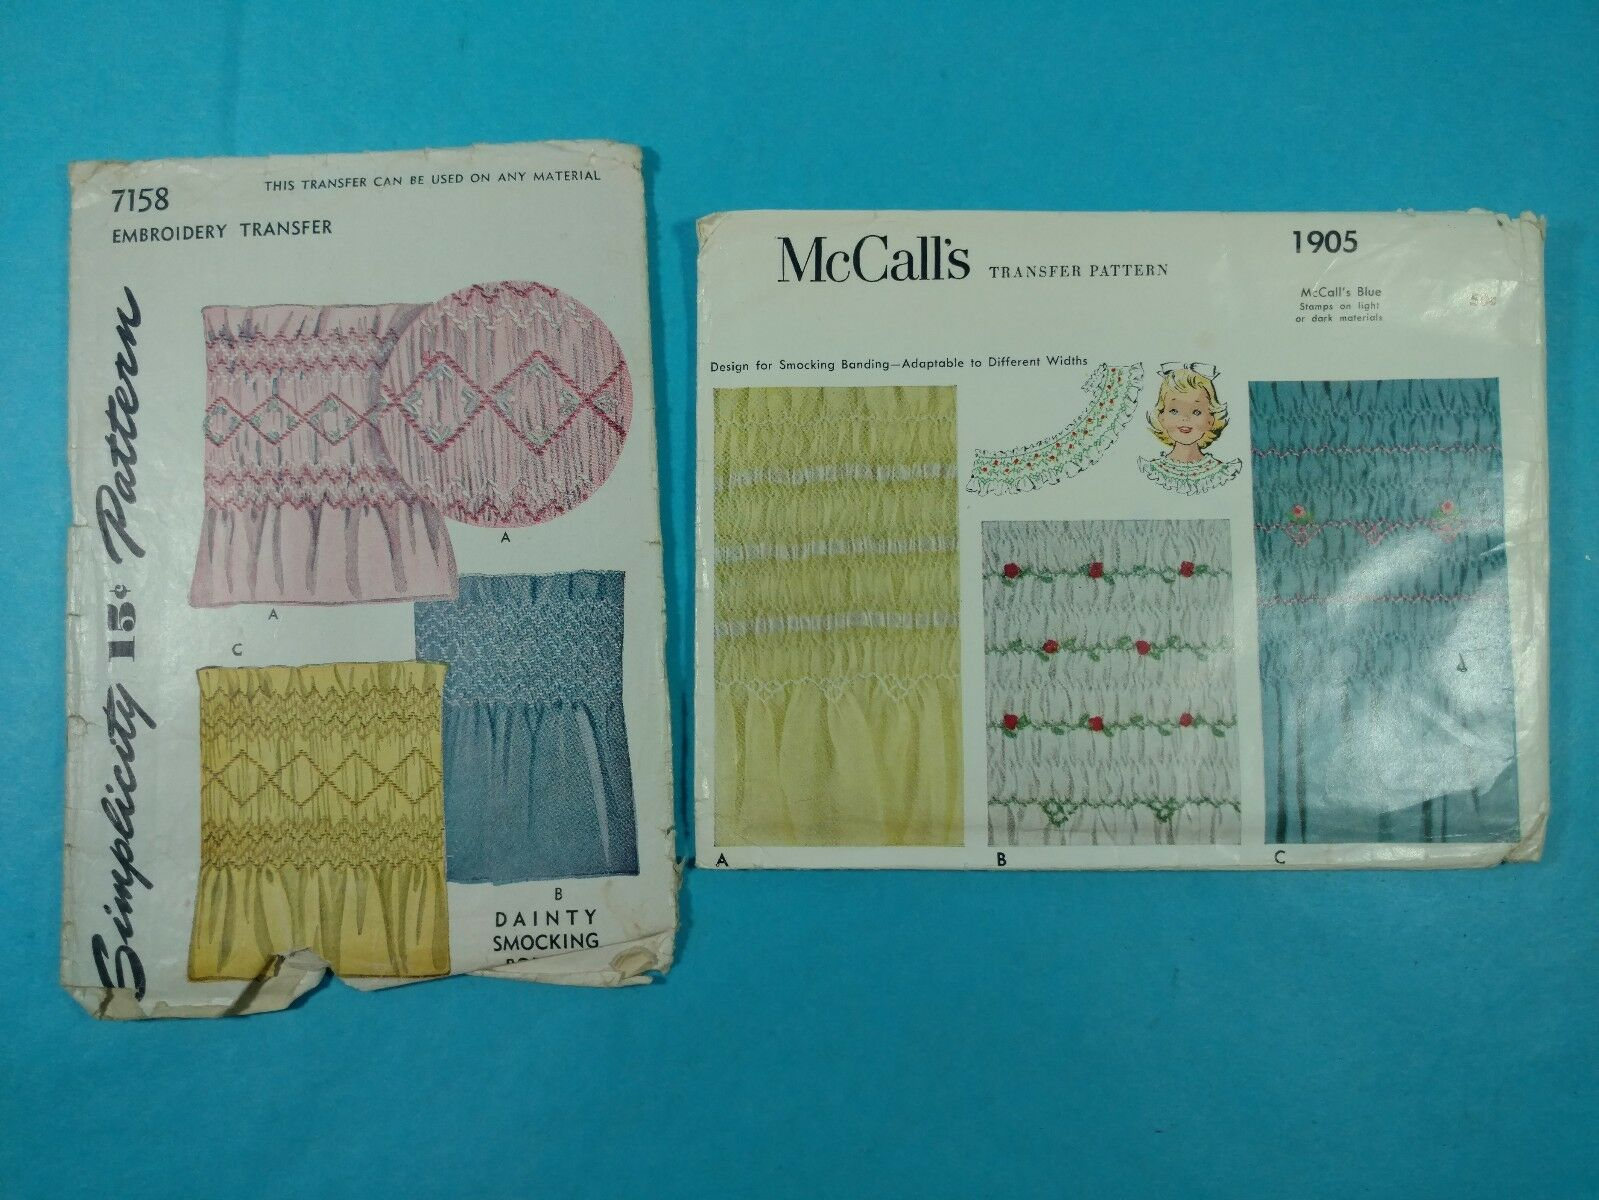 Embroidery Transfer Patterns Lot 120 Group Of 2 Vintage Sewing Patterns Embroidery Transfer Pattern